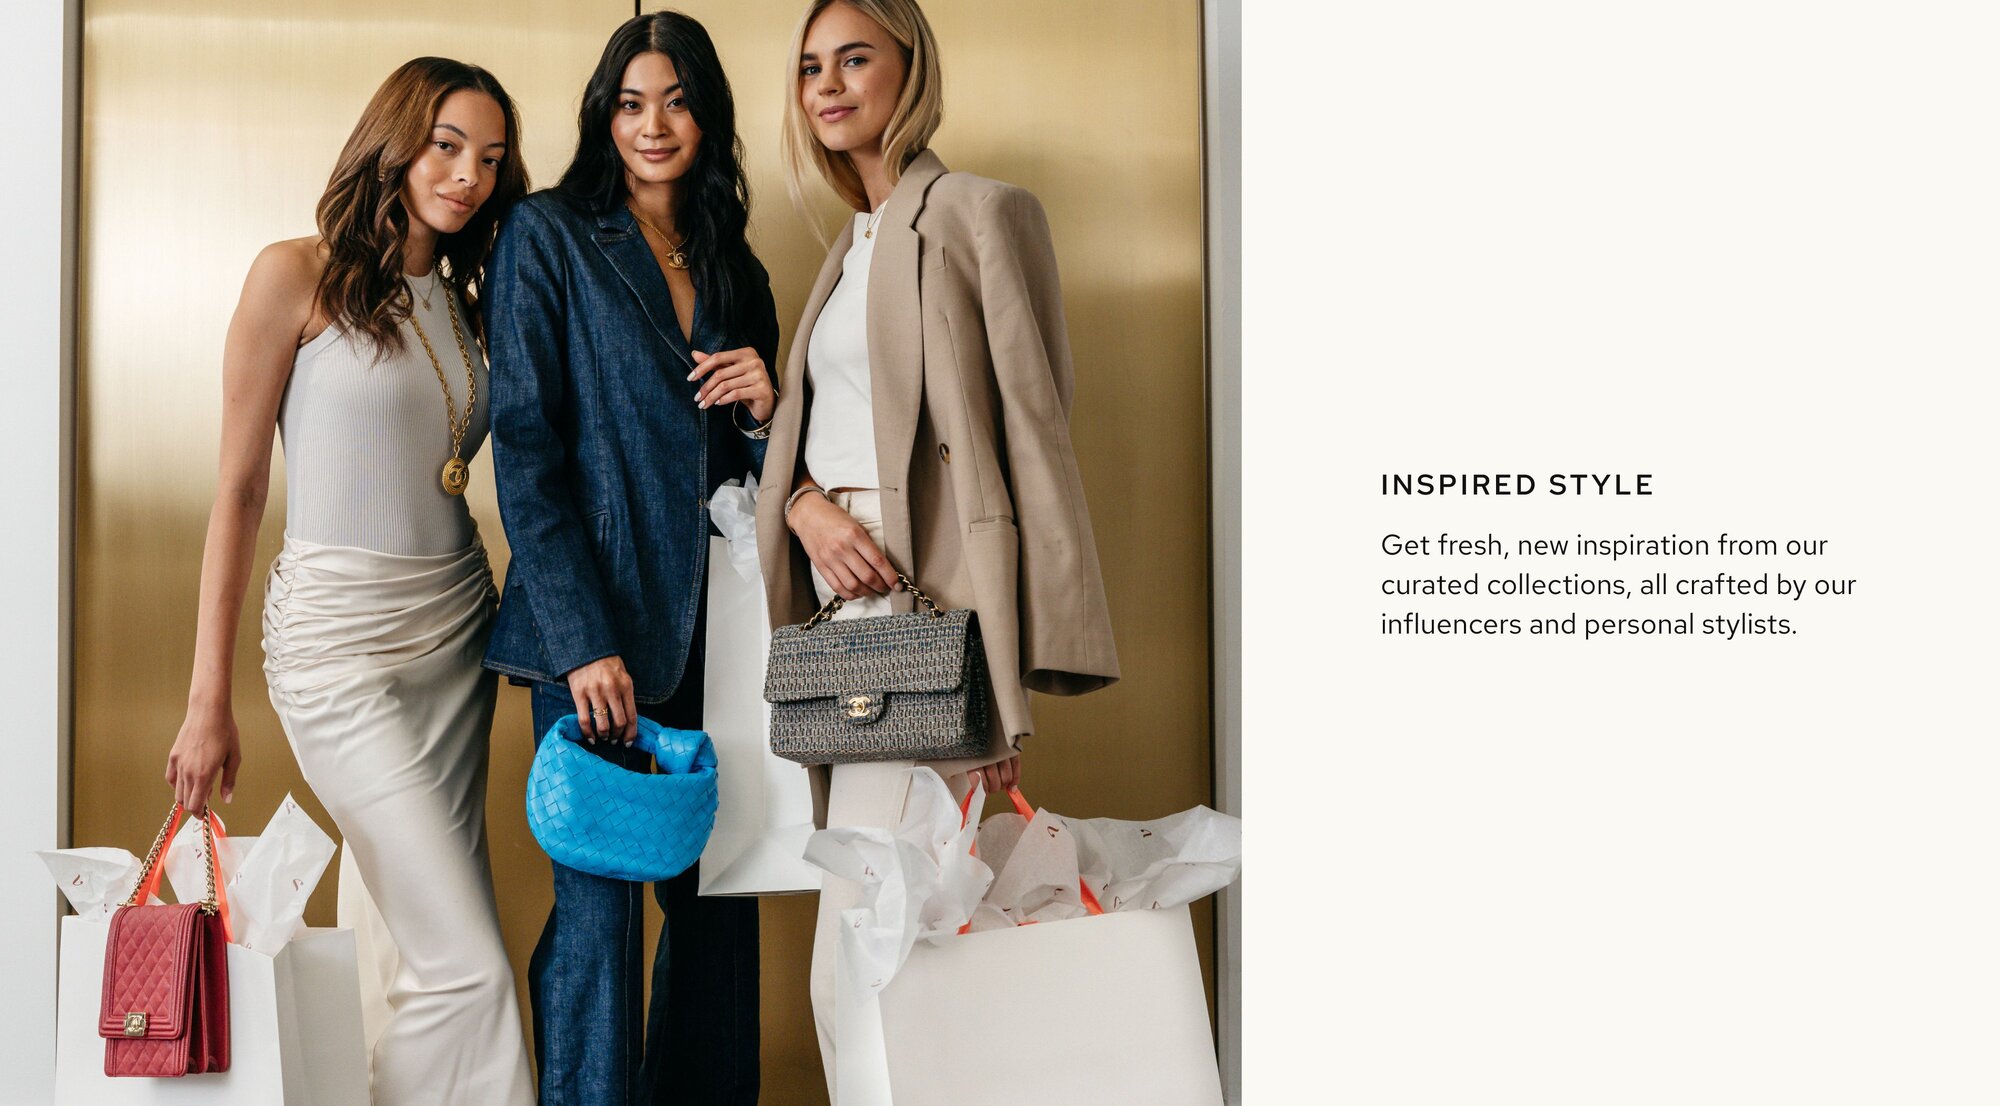 Photo of three women standing in front of a golden door, smiling and wearing trendy clothes, each holding luxury handbags and shopping bags from Vivrelle. Text on image reads: "Inspired Style: Get fresh, new inspiration from our curated collections, all crafted by our influencers and personal stylists.”